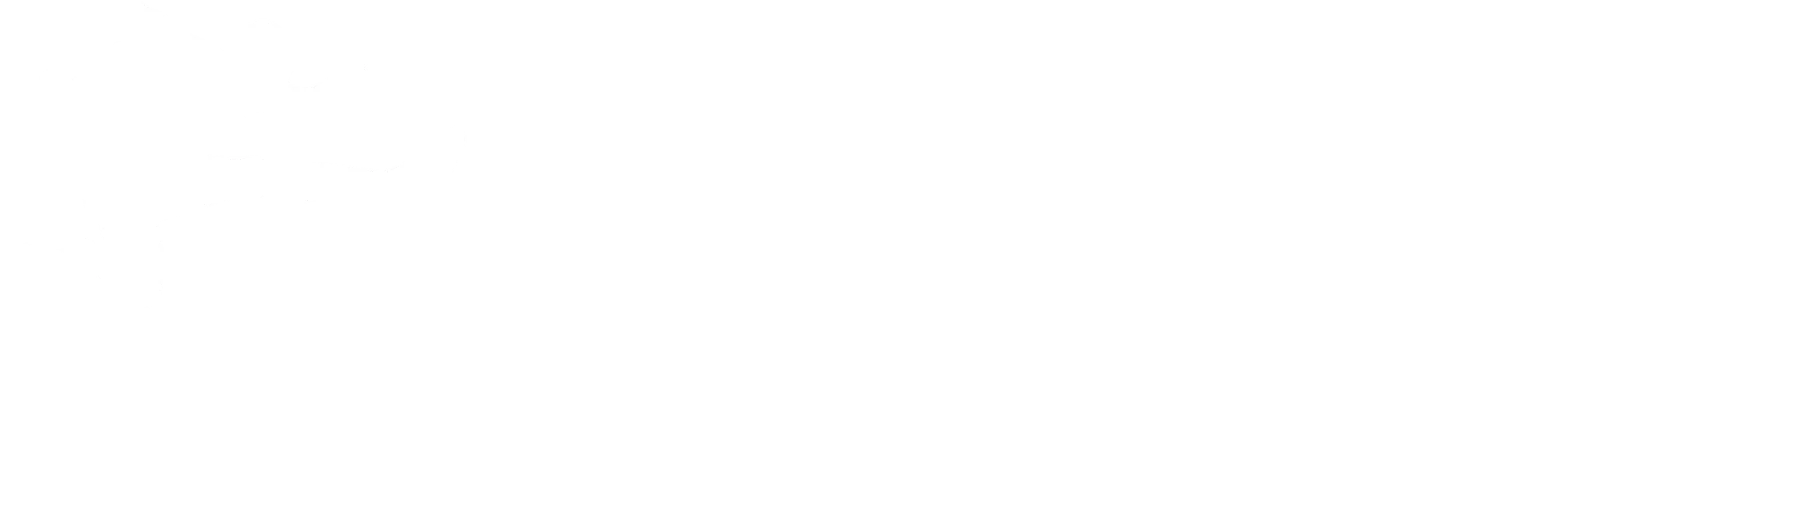 Up JUMP Media - Website Design for Small Business